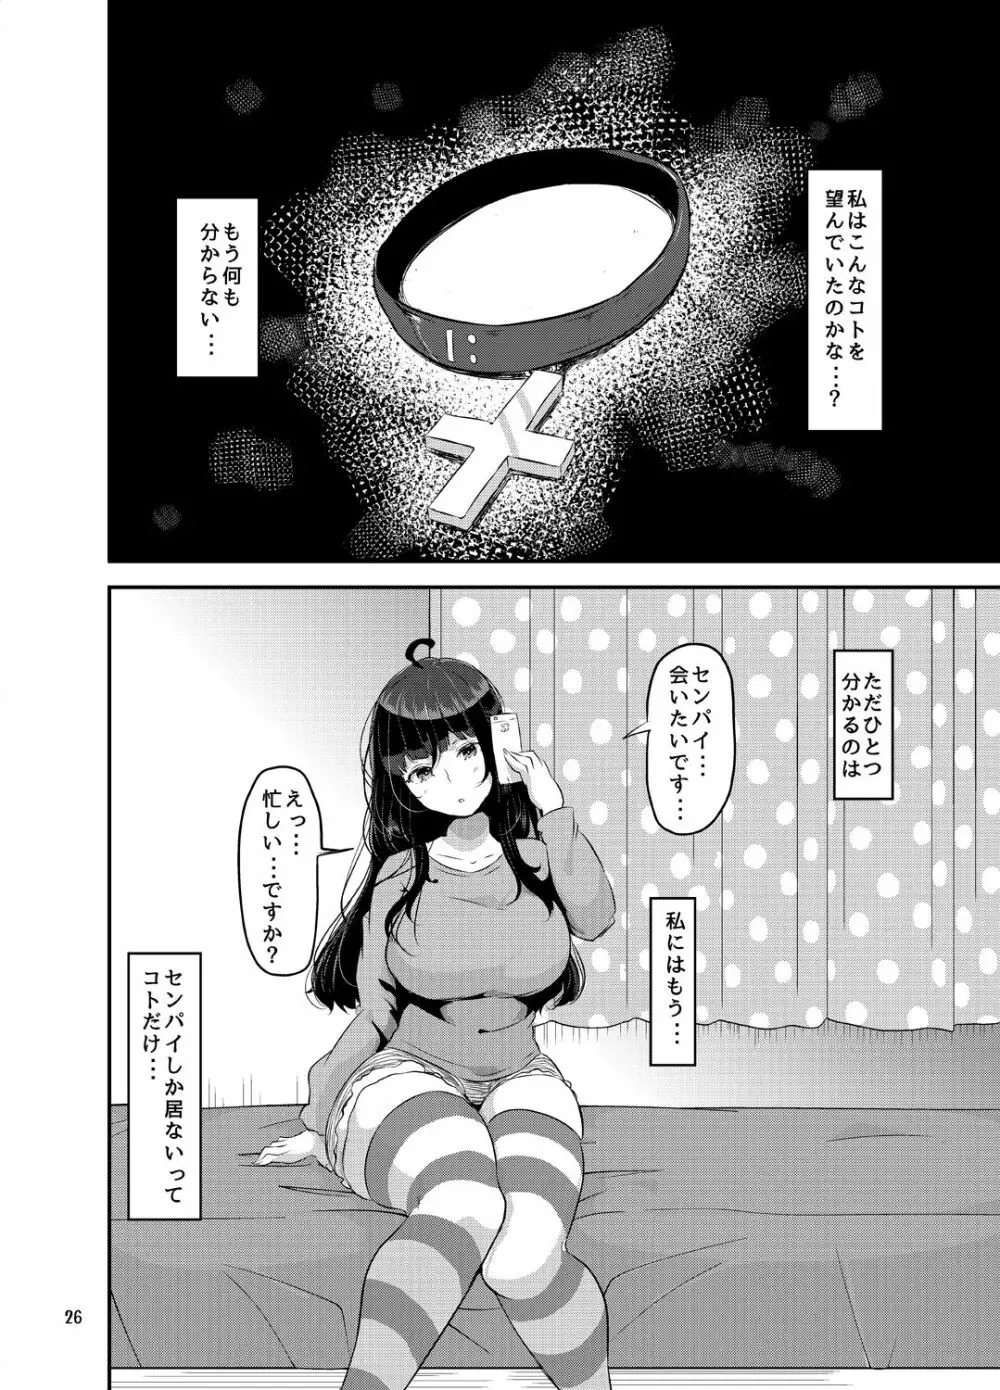 好き好き好き好き好き好き好き好き ver.4 Page.27